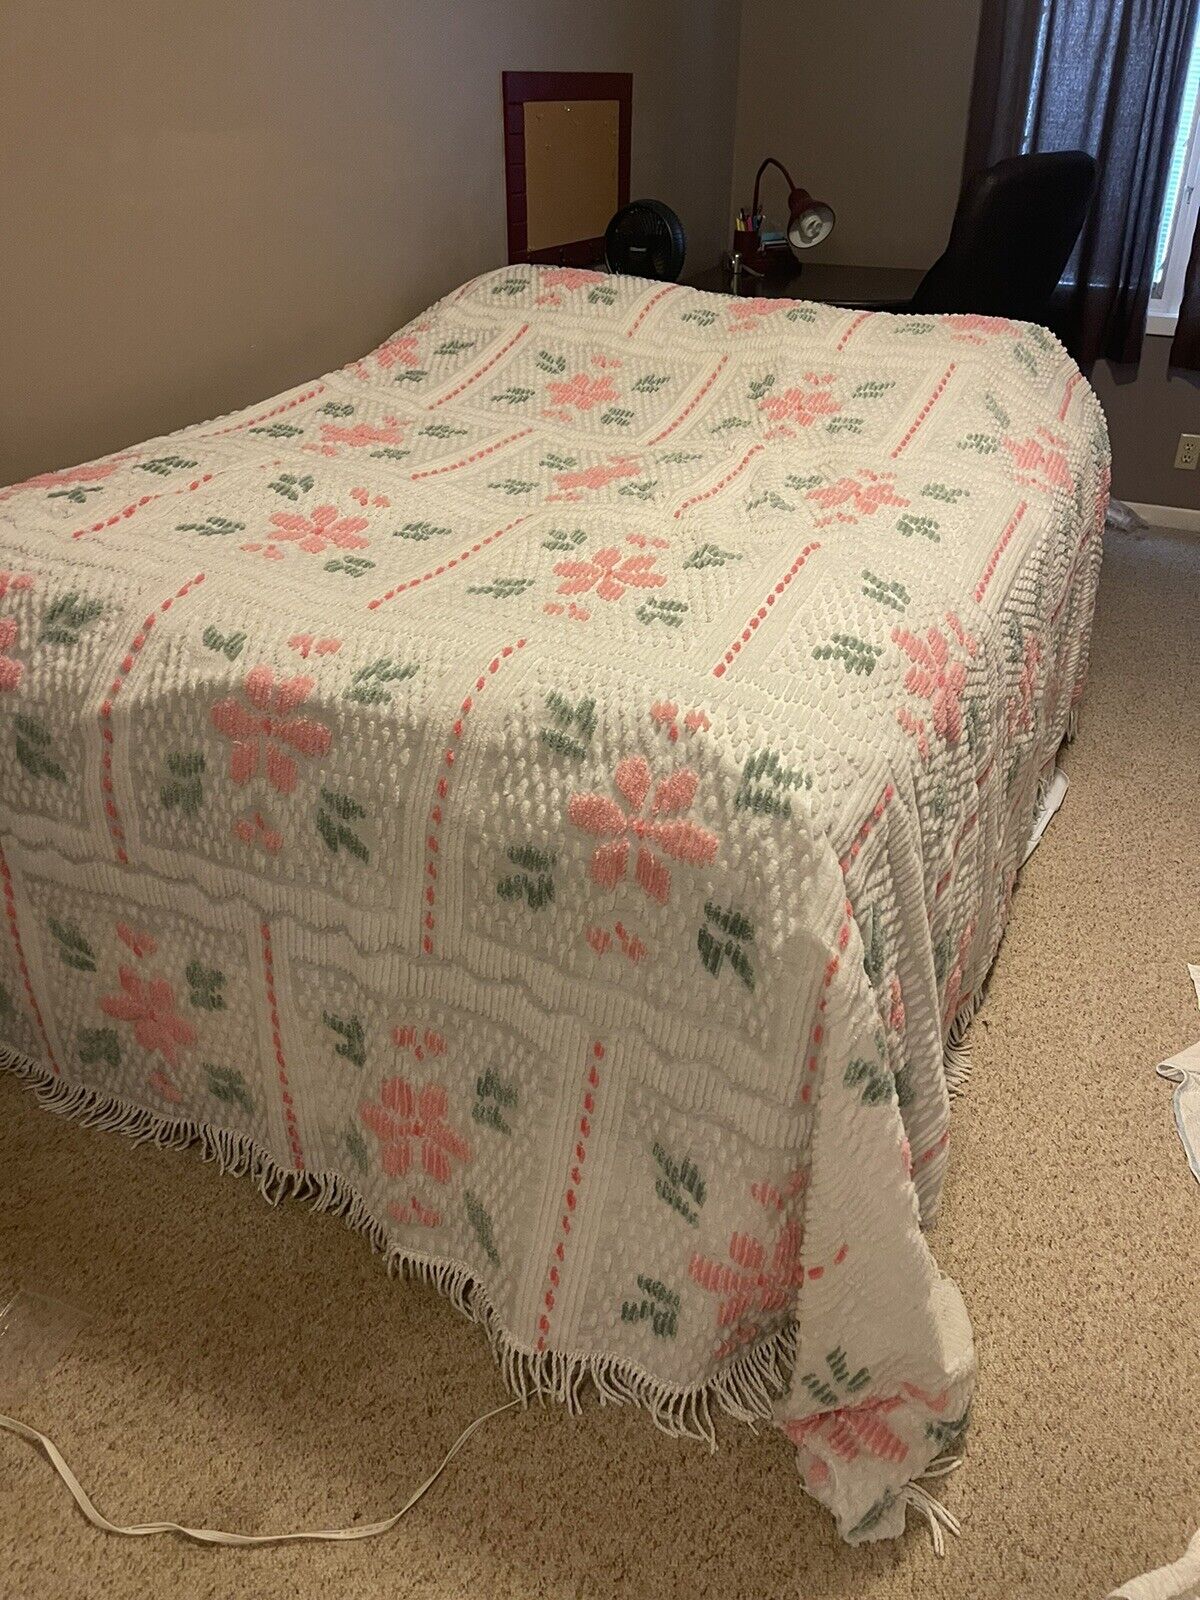 Vintage Chenille Bedspread Off White W/ Pink Flowers Full Size 104” X 92” As Is